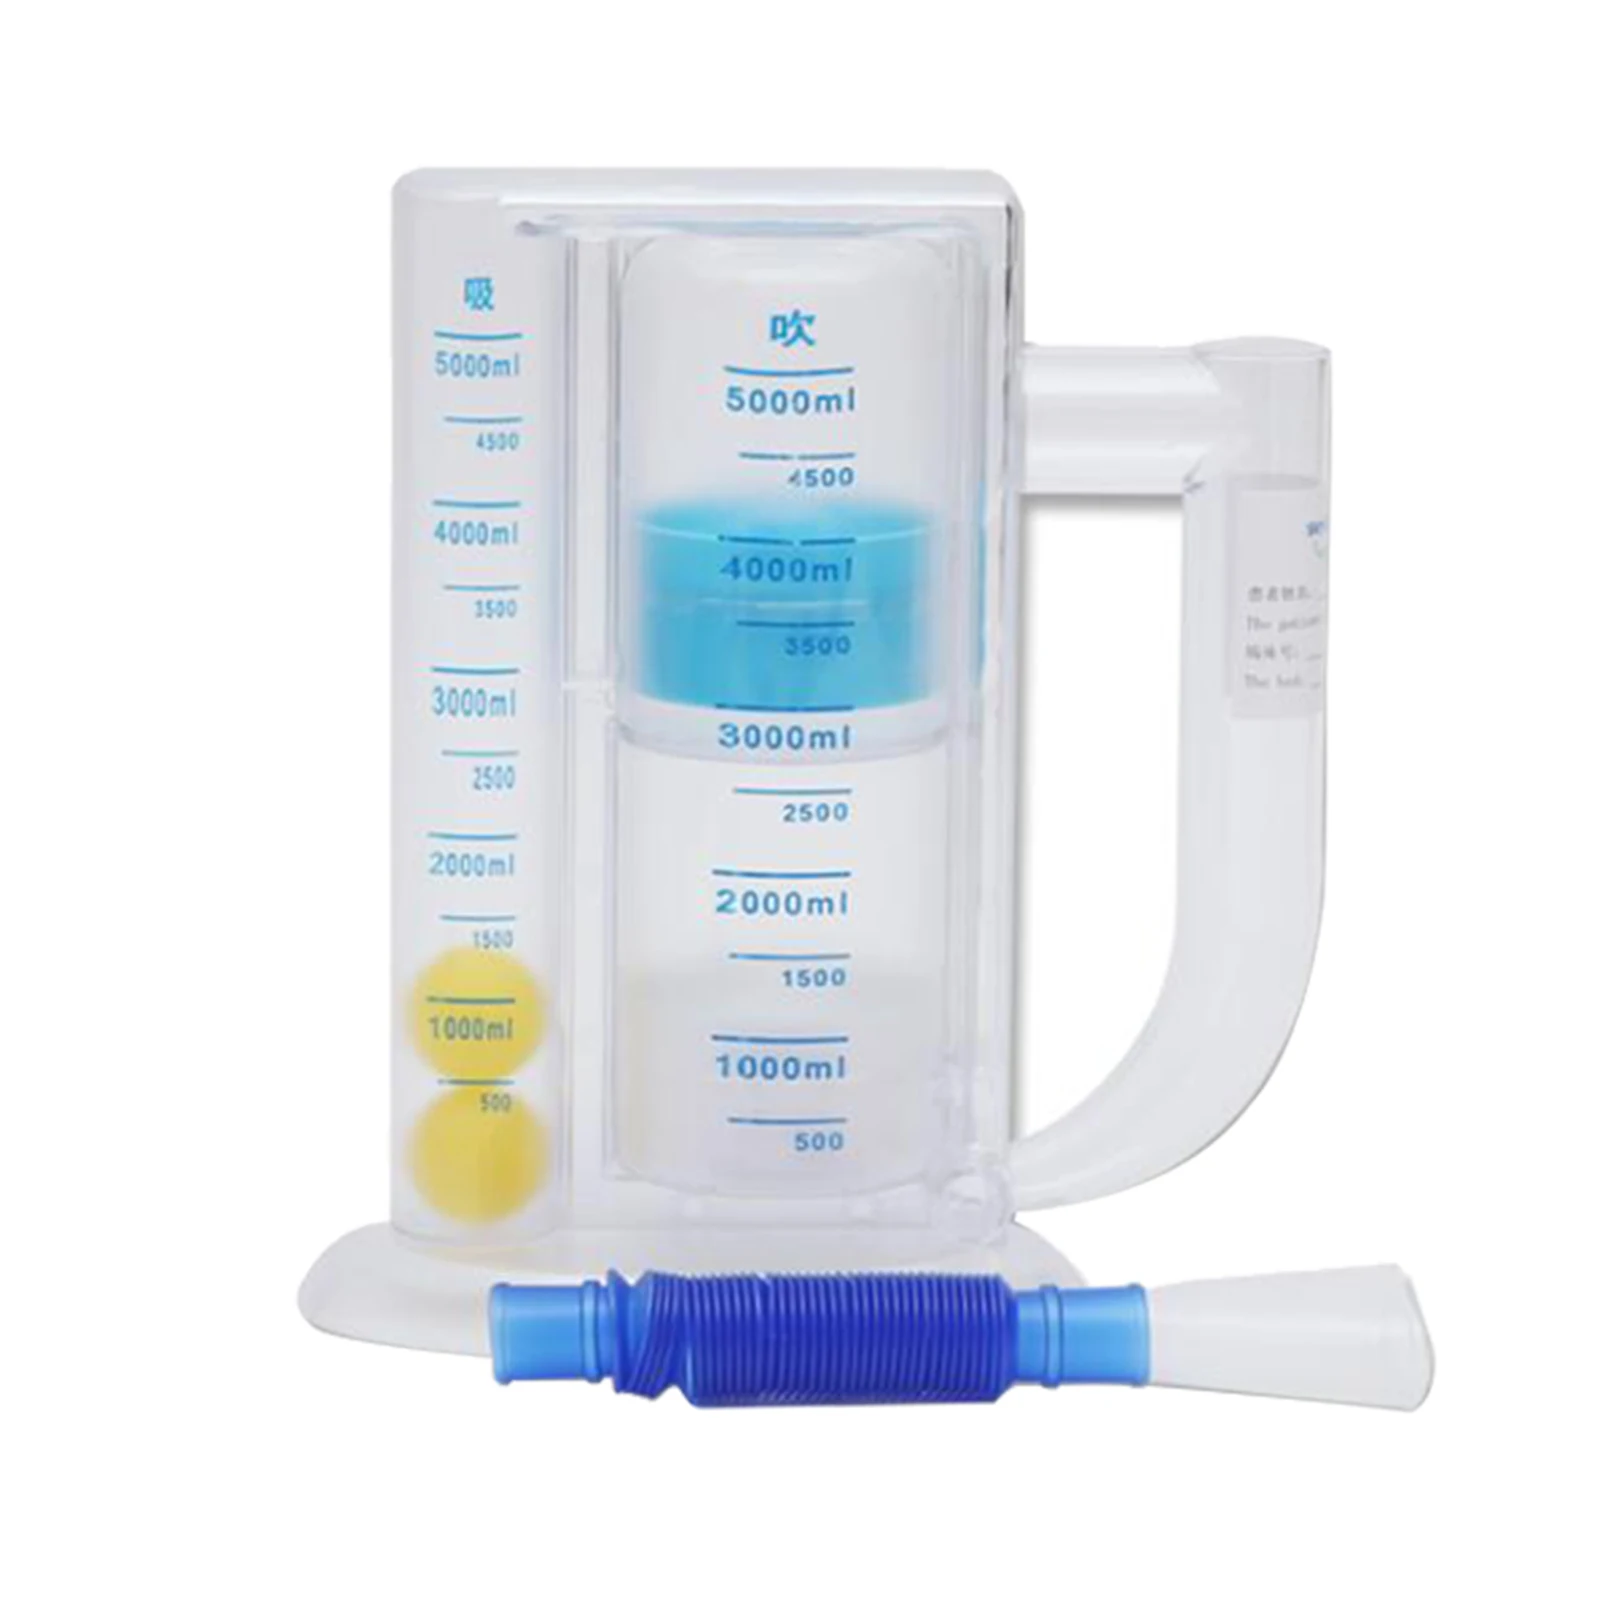 5000ml 3-Ball Lung Deep Breath Trainer Exerciser Incentive Spirometer, helps fight stress and anxiety